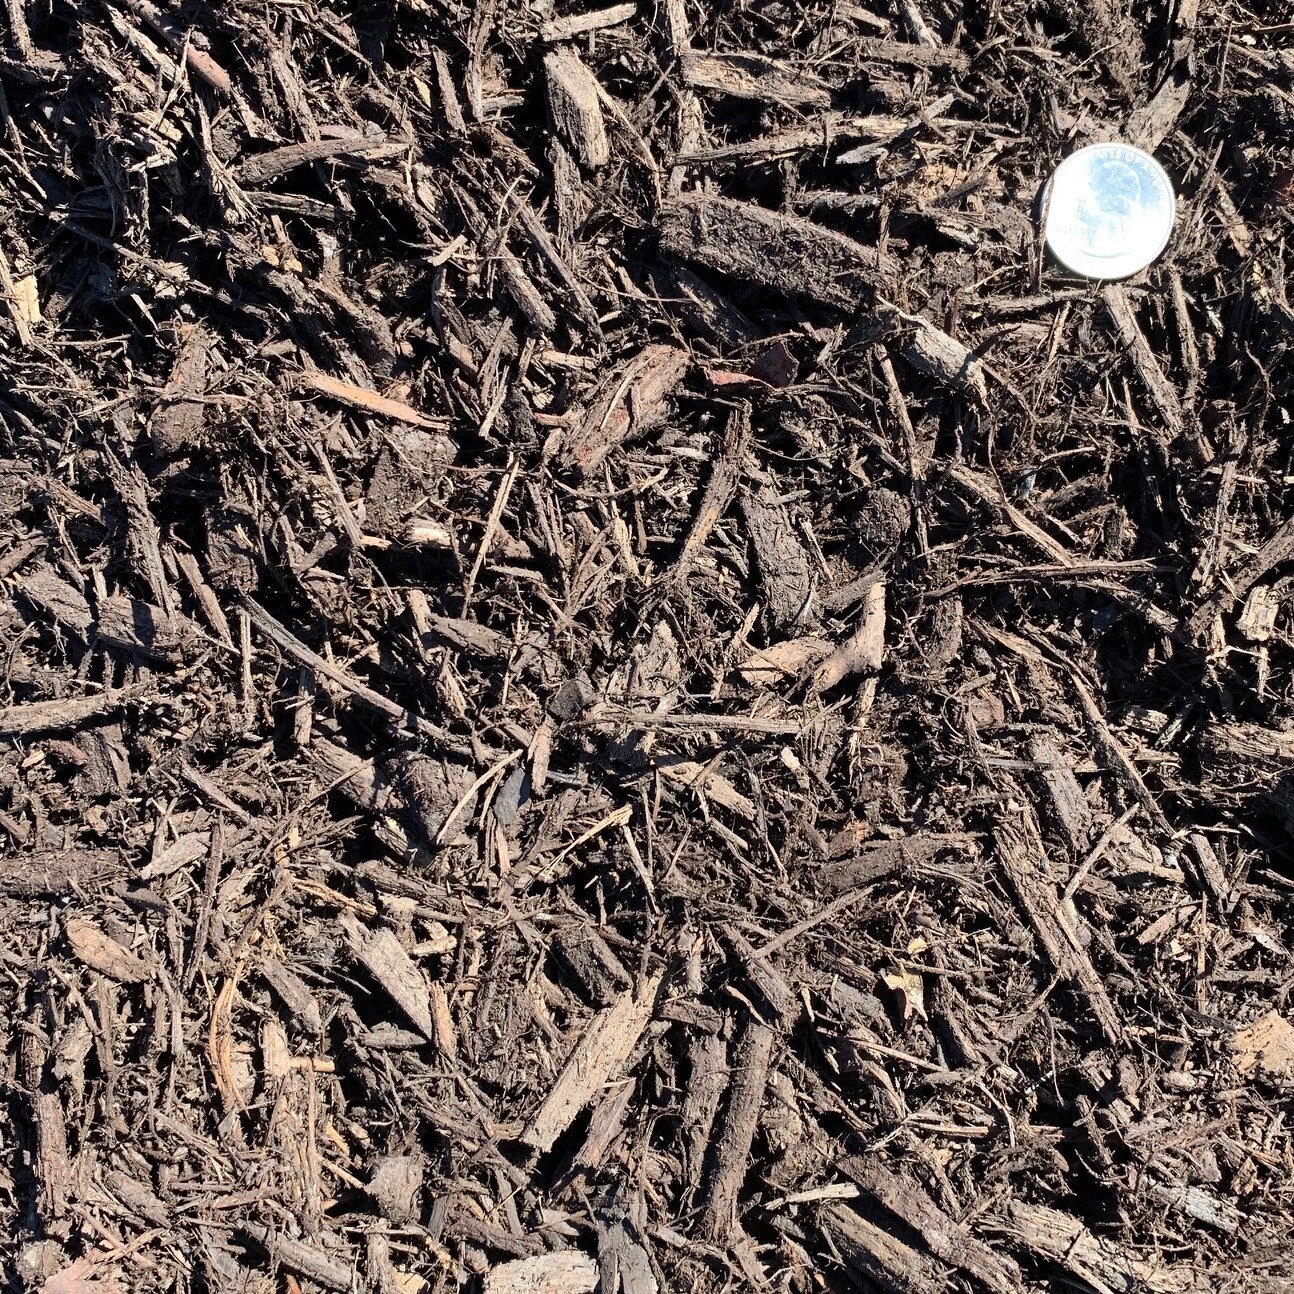  Brown mulch with a quarter for size representation showing shredded mulch 1 inch minus with fines. 